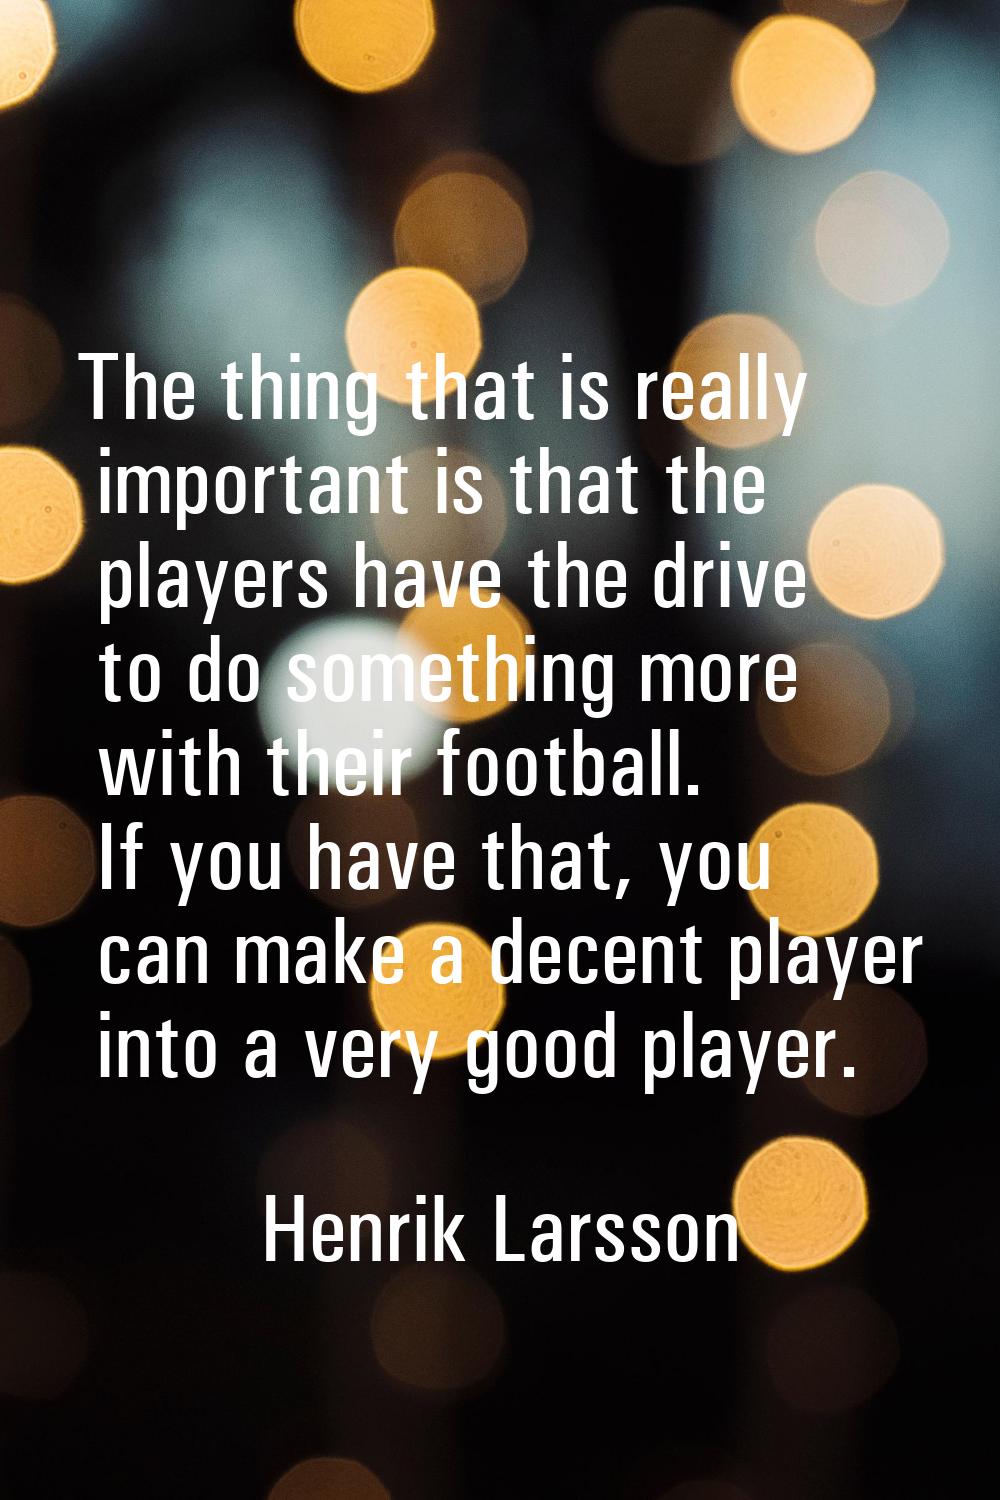 The thing that is really important is that the players have the drive to do something more with the